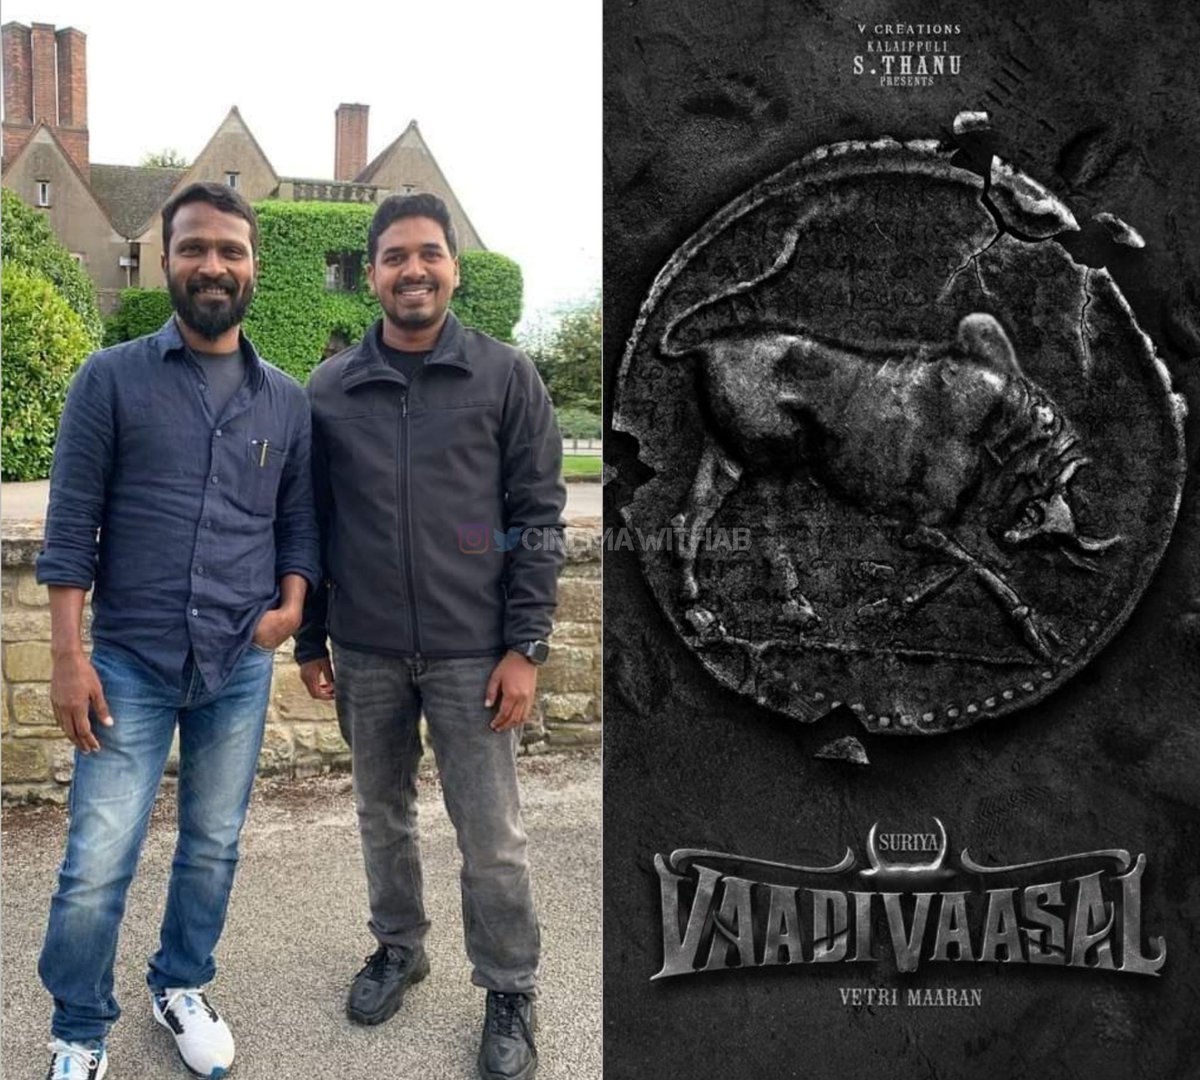 Director #VetriMaaran at London for Monitoring CG work of #Suriya's #VaadiVaasal 📸✨

The movie involves heavy CG & it's going to be done by an leading company who did CG for Avatar 🫰🔥